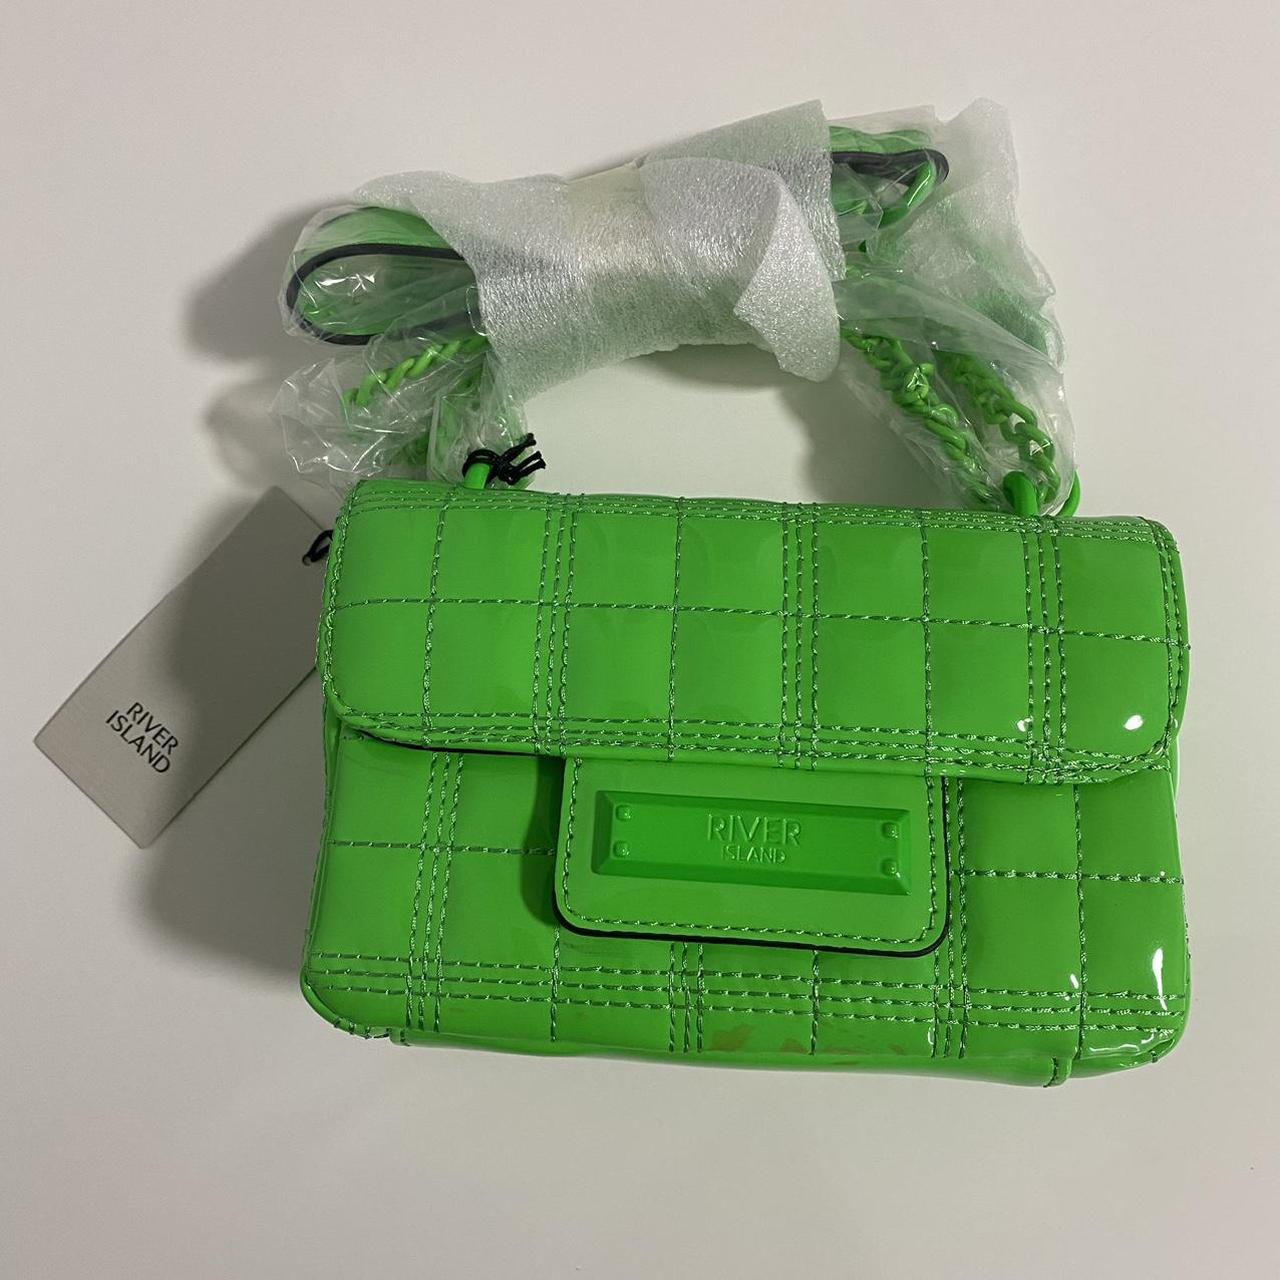 River Island green bag is perfect for everyday use... - Depop